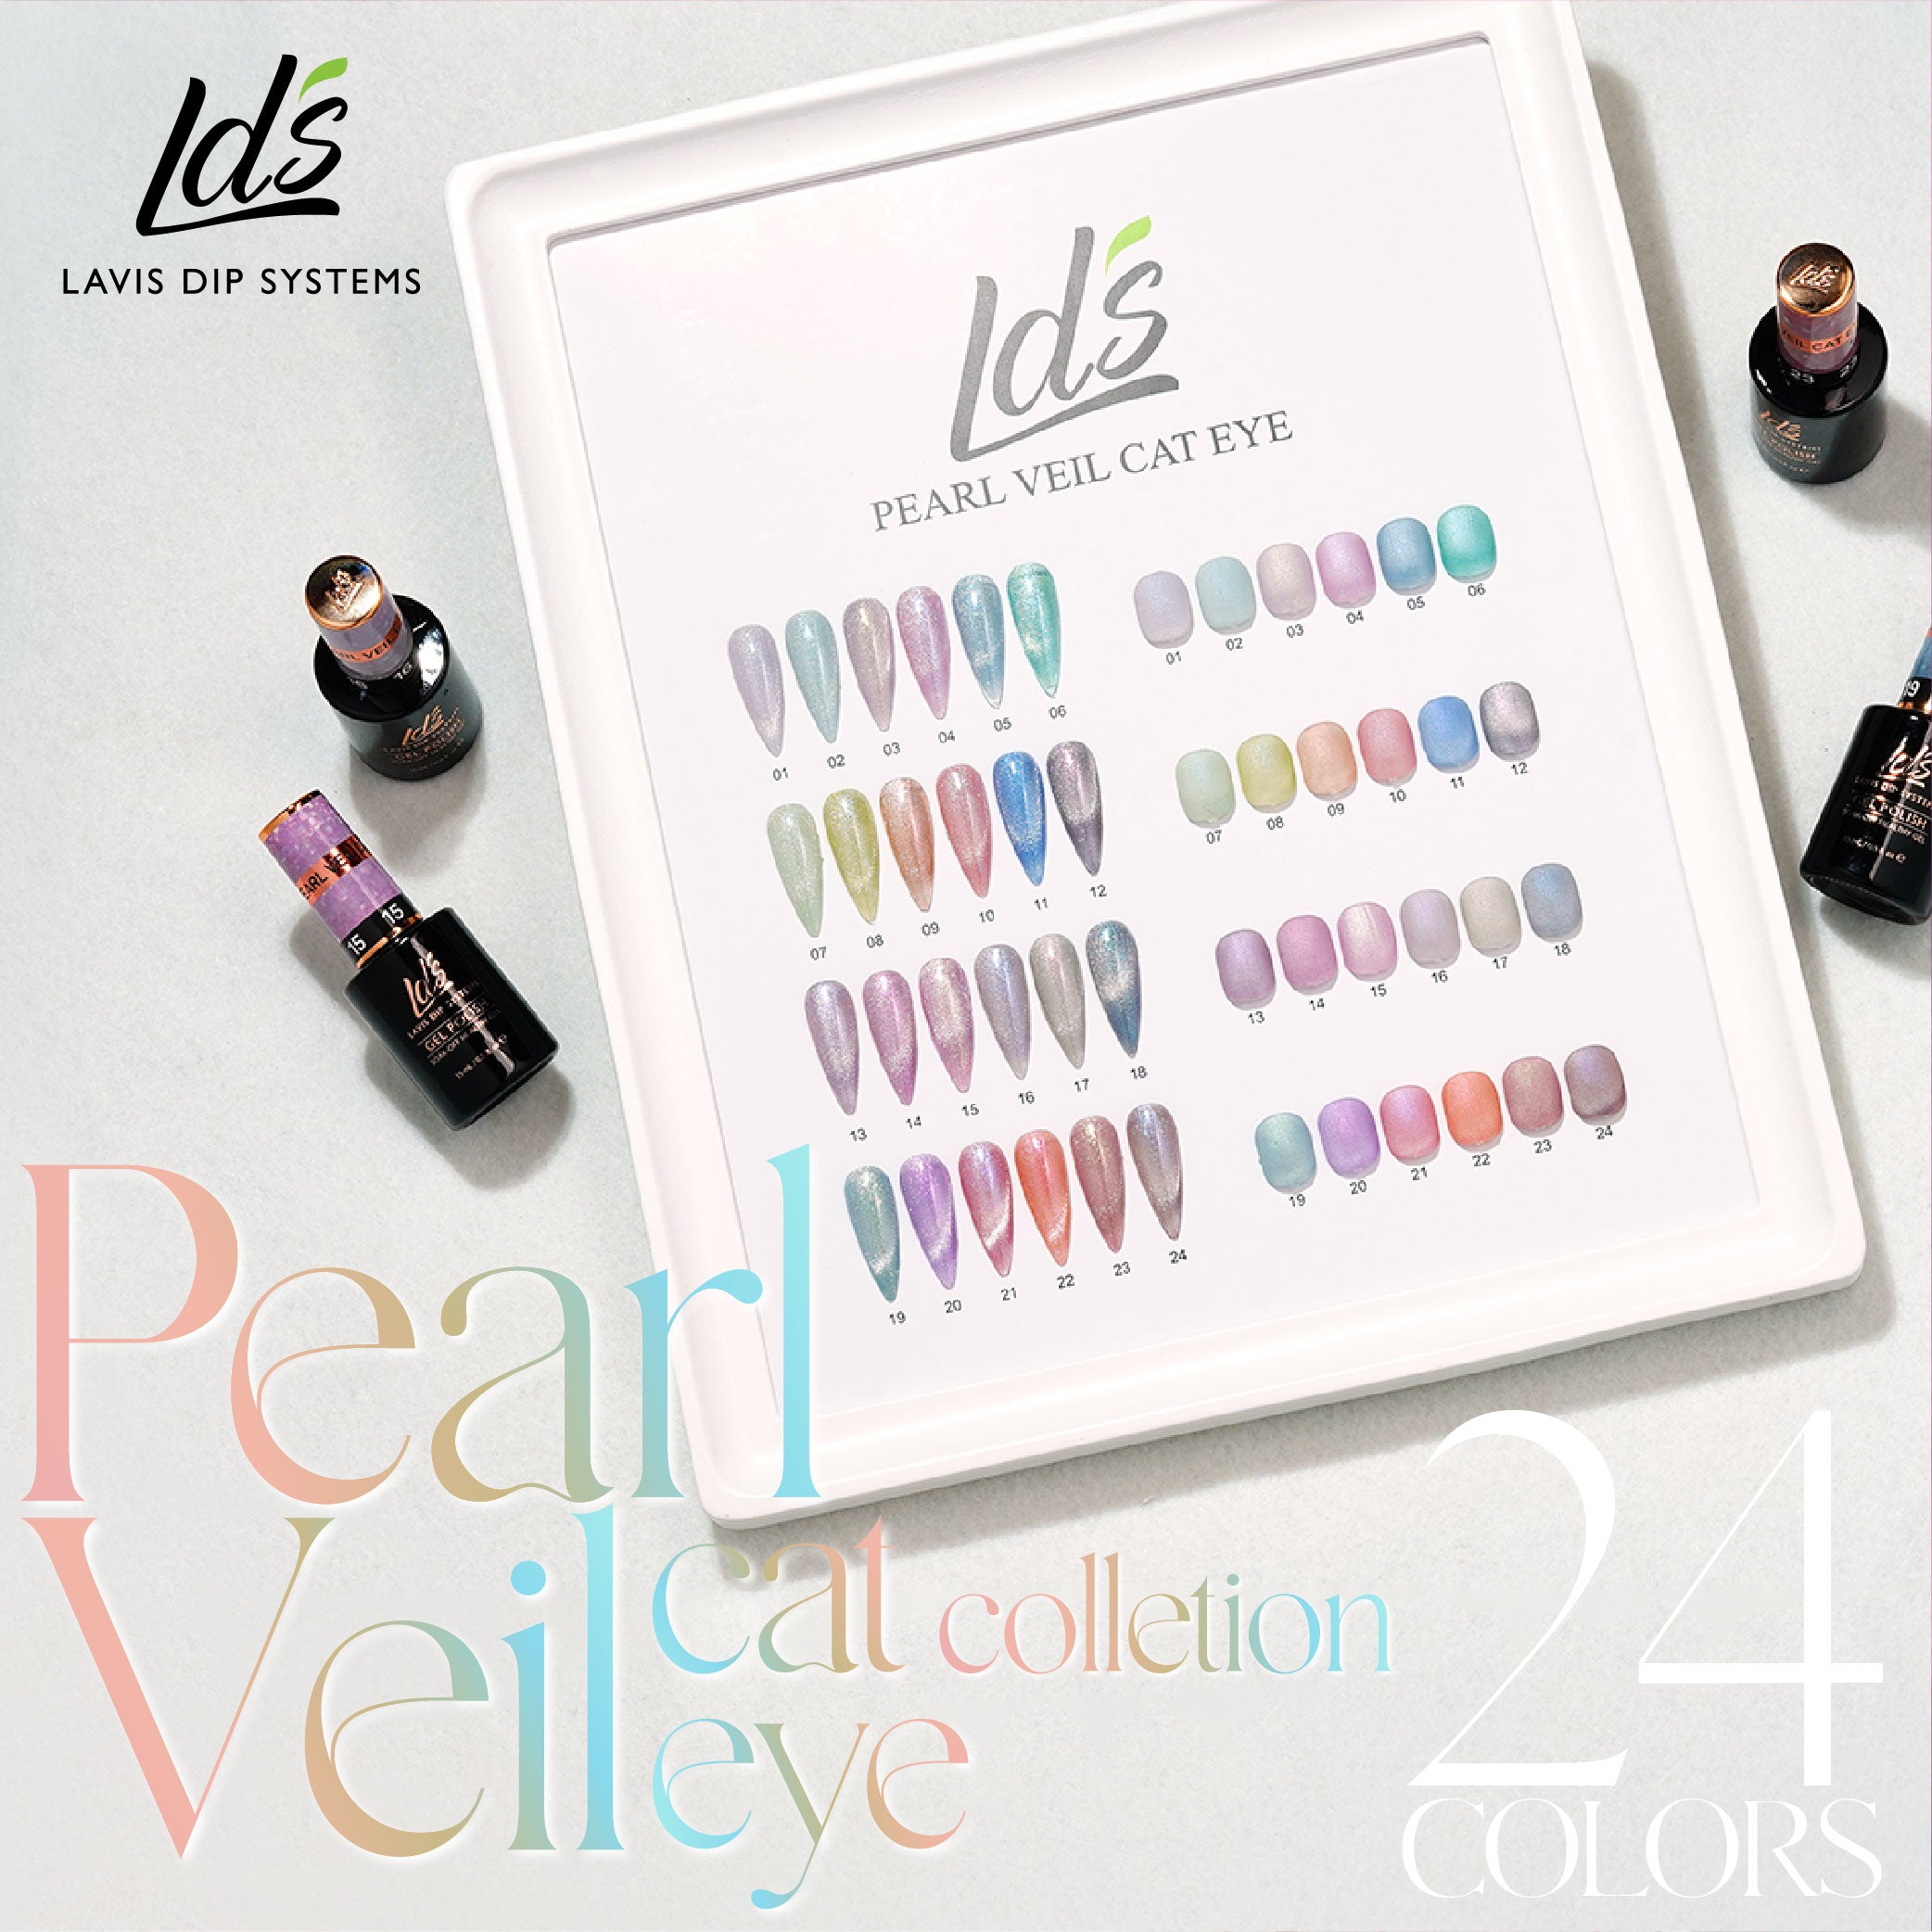 LDS Pearl CE - 15 - Pearl Veil Cat Eye Collection